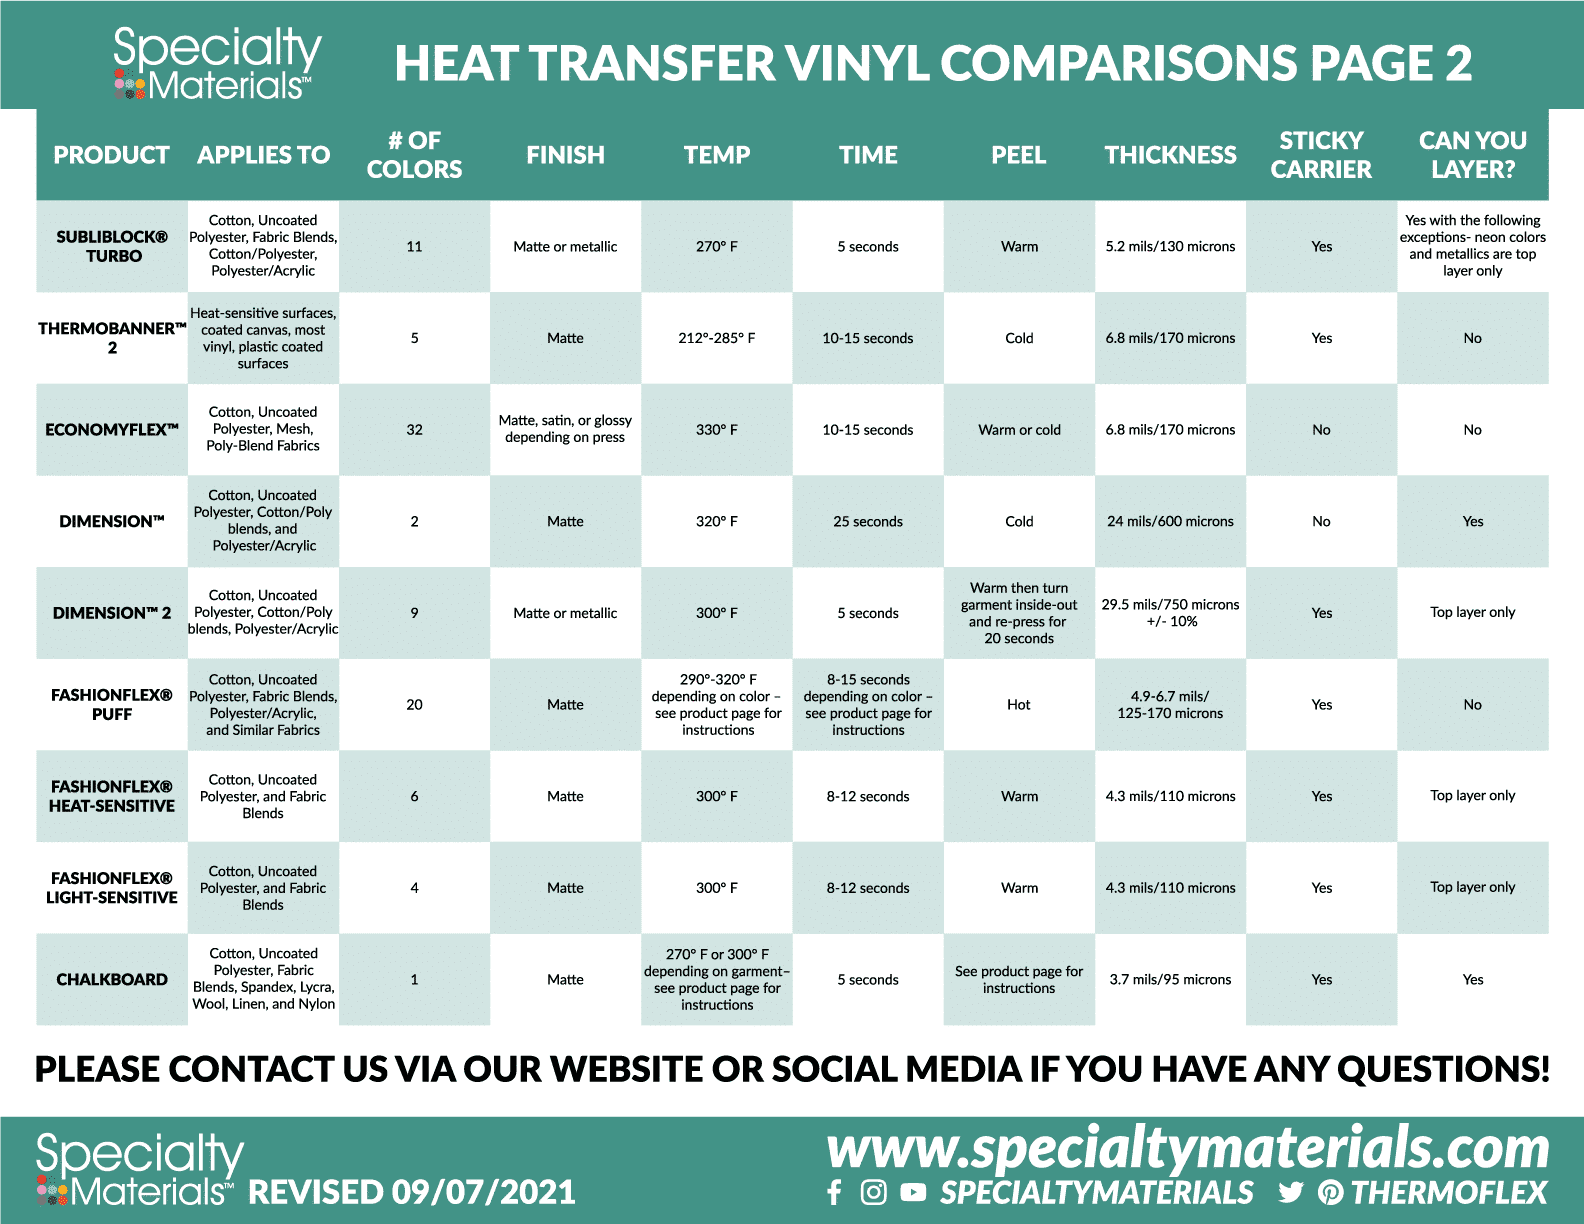 A printable image of the above HTV comparison information, the second page